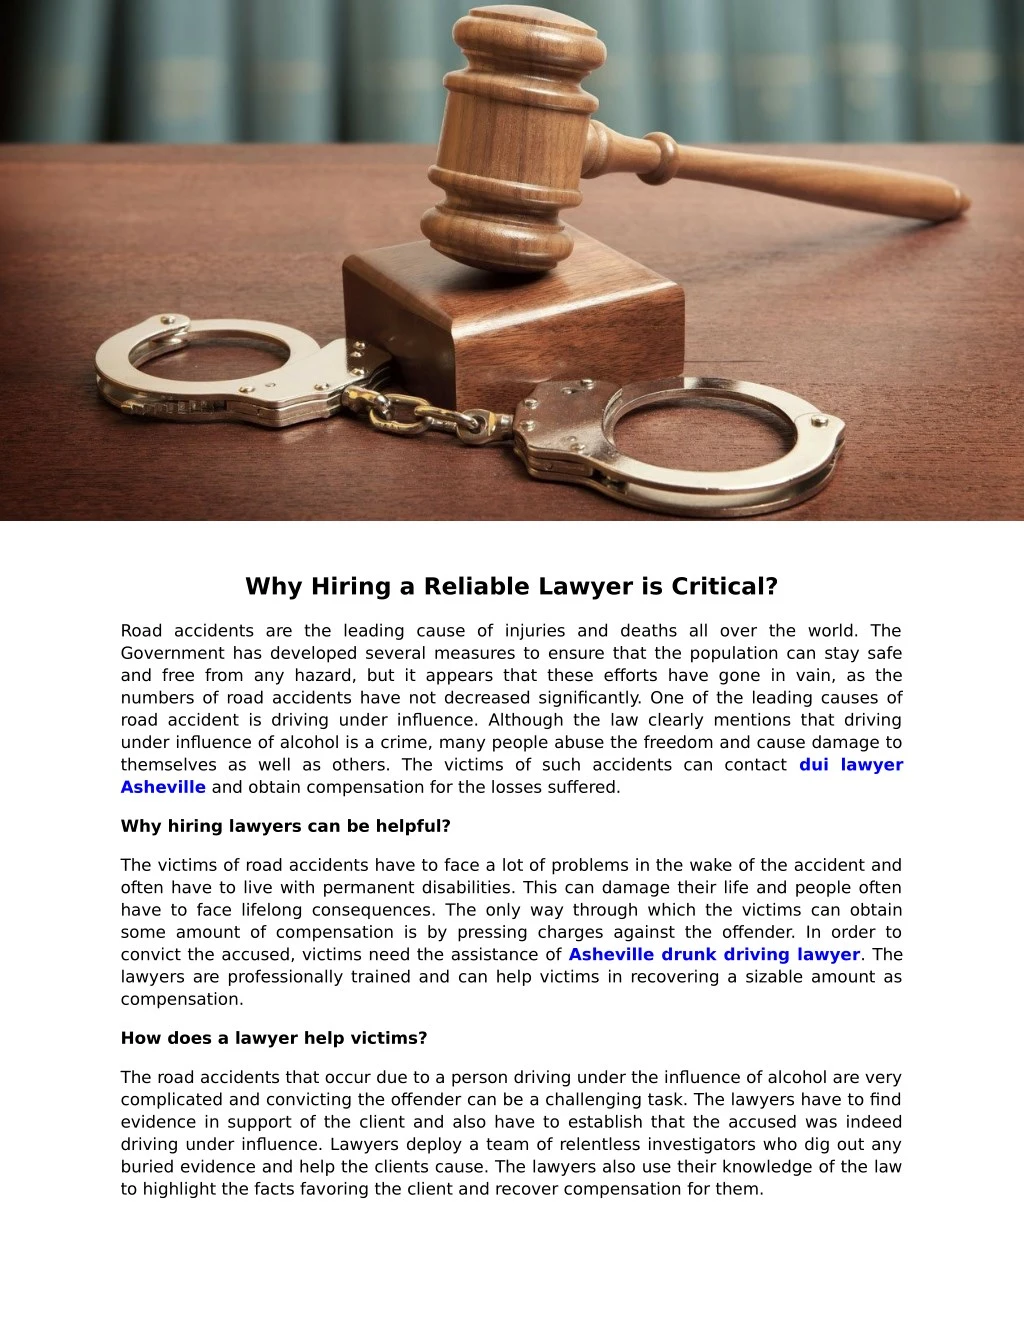 why hiring a reliable lawyer is critical